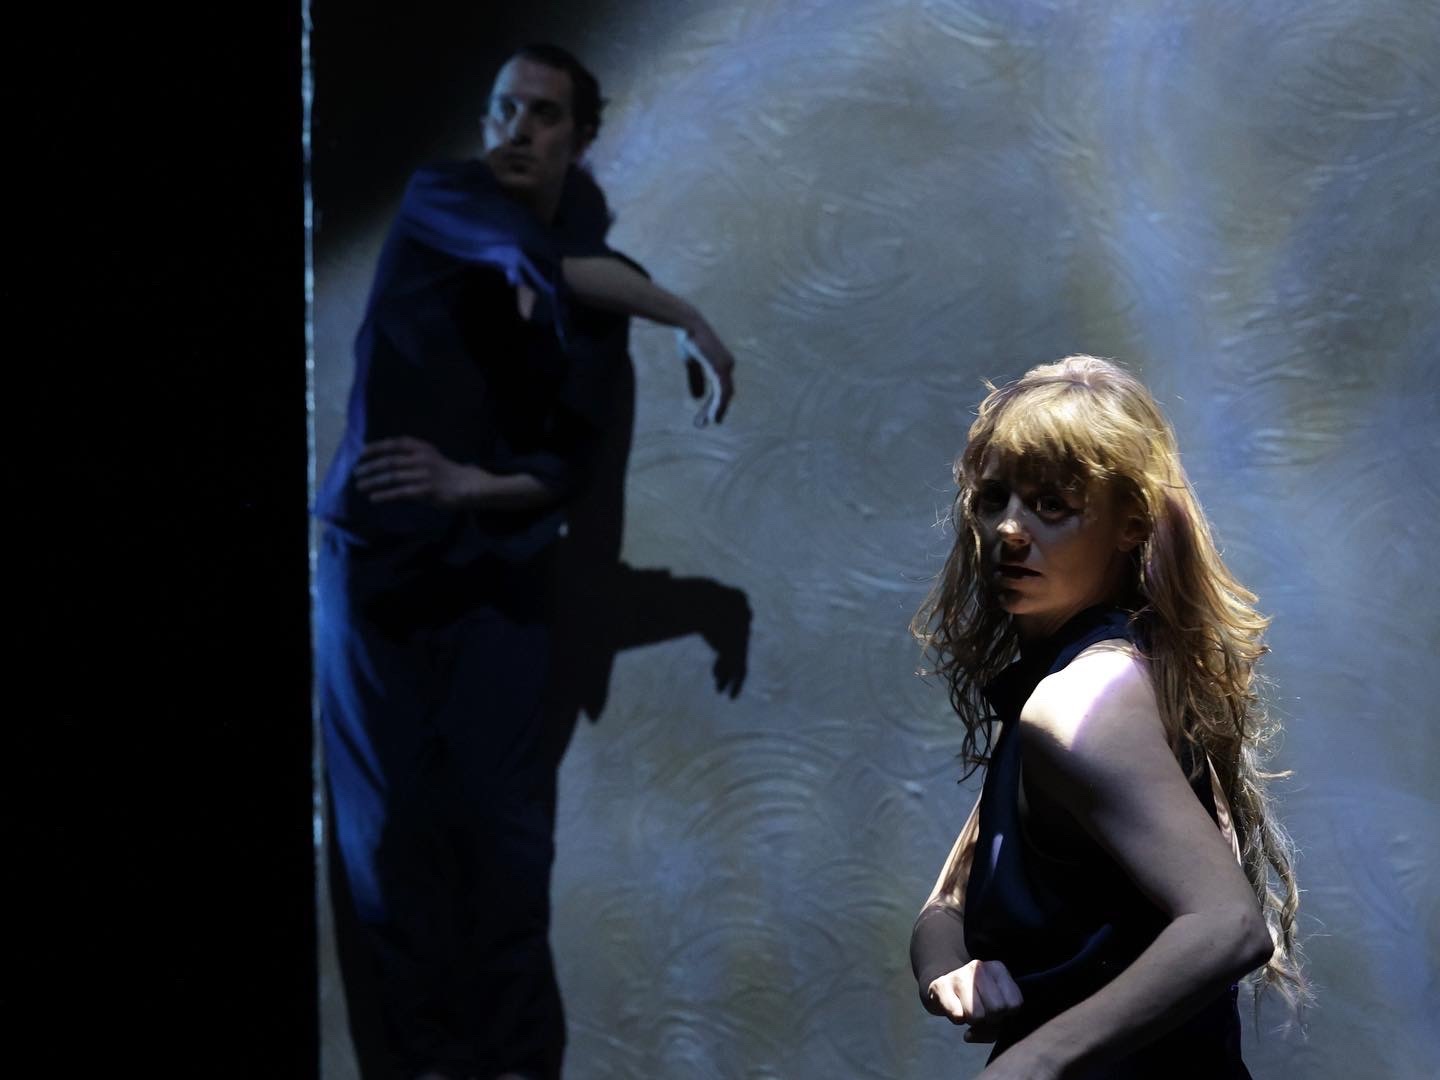 Two people are dancing. In the foreground, a woman with long blonde hair wearing a dark dress looks over her shoulder. In the background, a man wearing dark clothing stretches a hand out. Ambient blue lighting encompasses them.